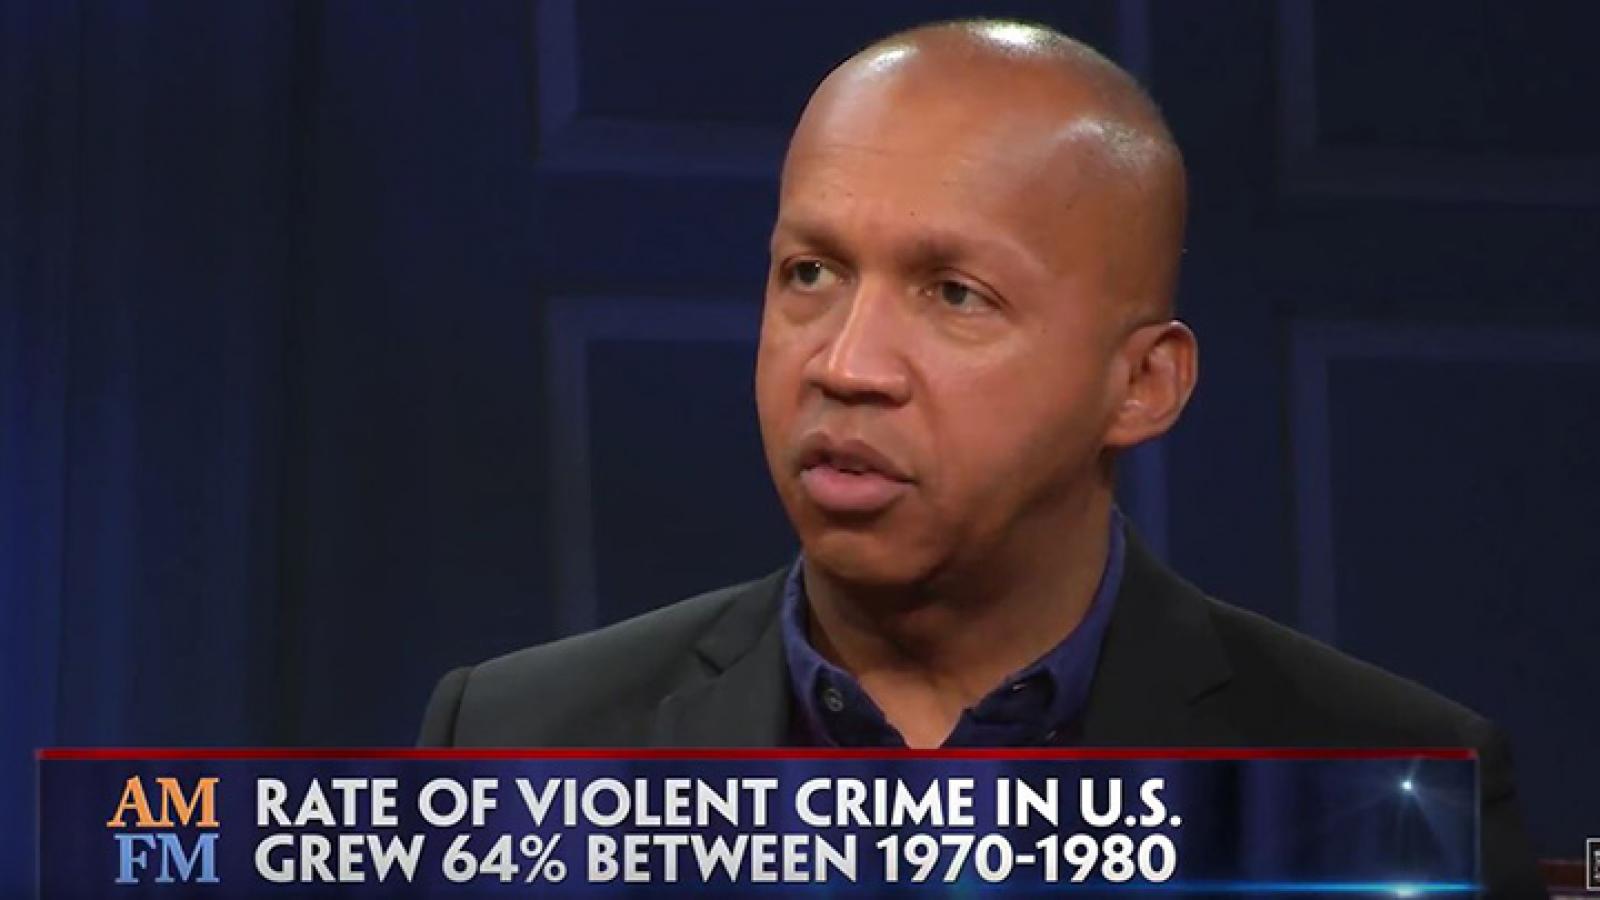 Civil rights lawyer Bryan Stevenson discusses the presumption of guilt that burdens people of color